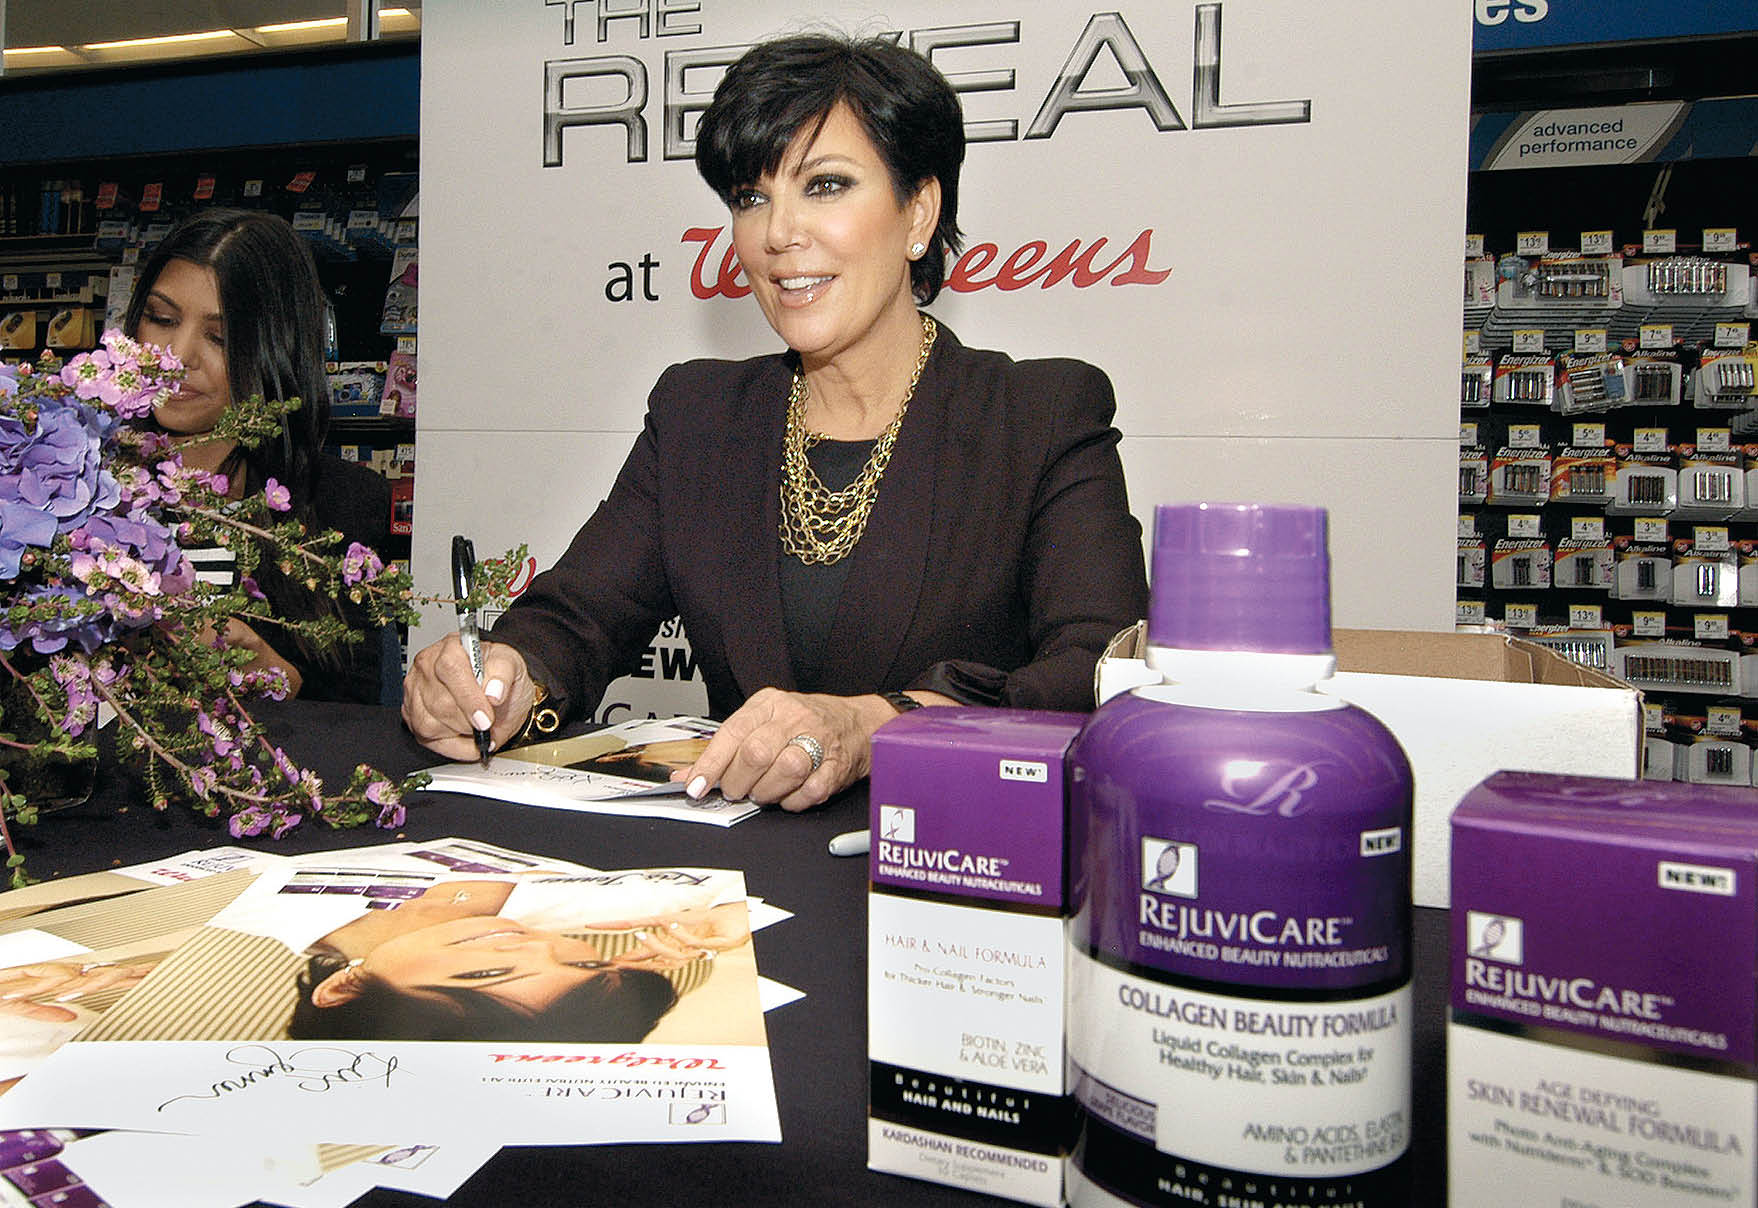 Kris Jenner promoting Rejuvicare. Image courtesy Getty Images and Rejuvicare